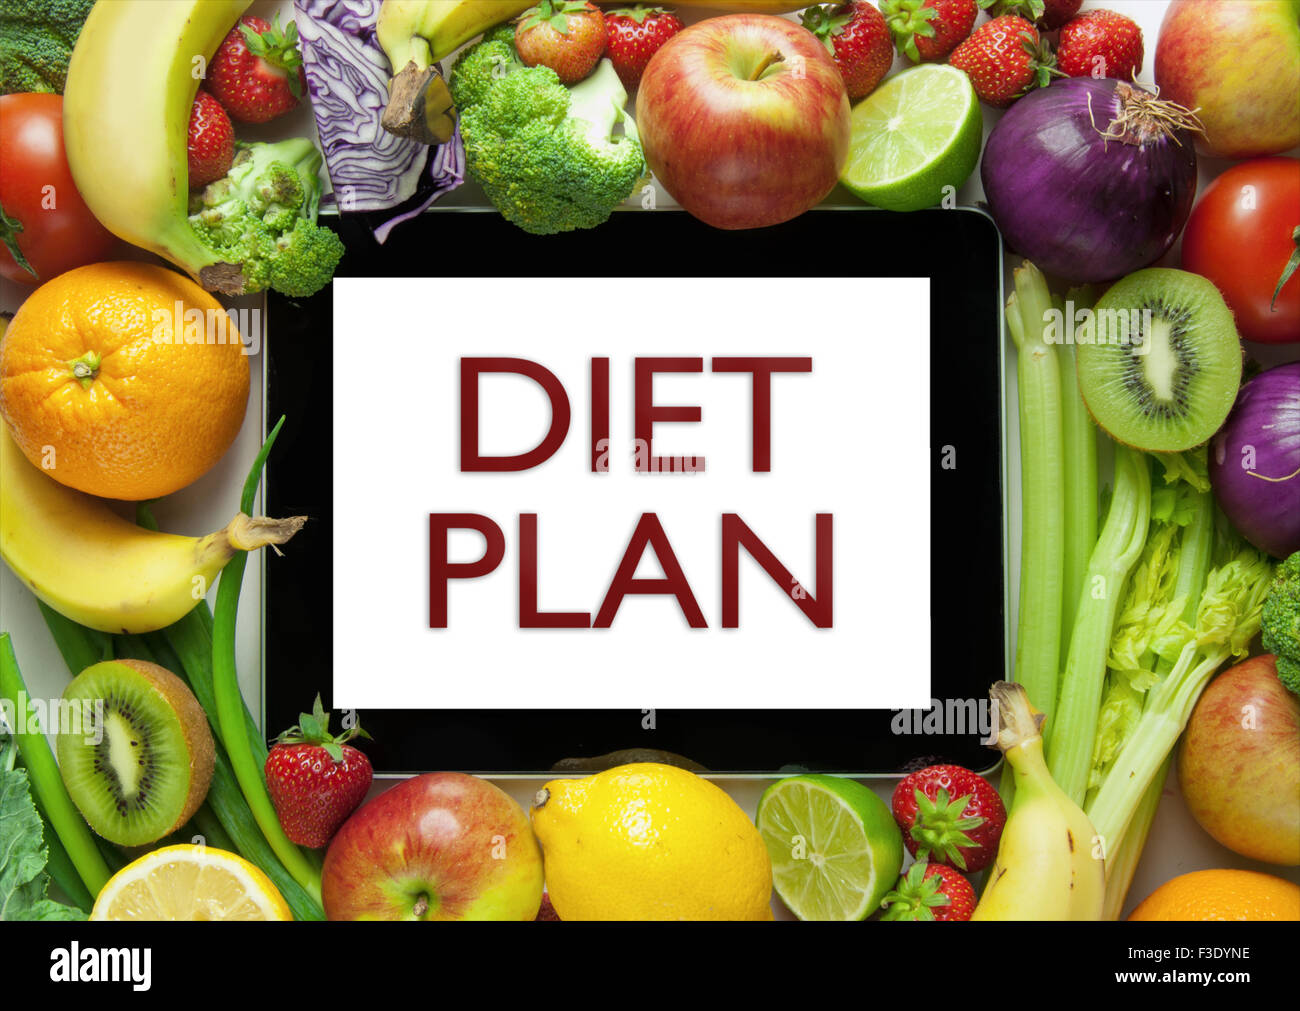 fruits and vegetables diet plan for weight loss